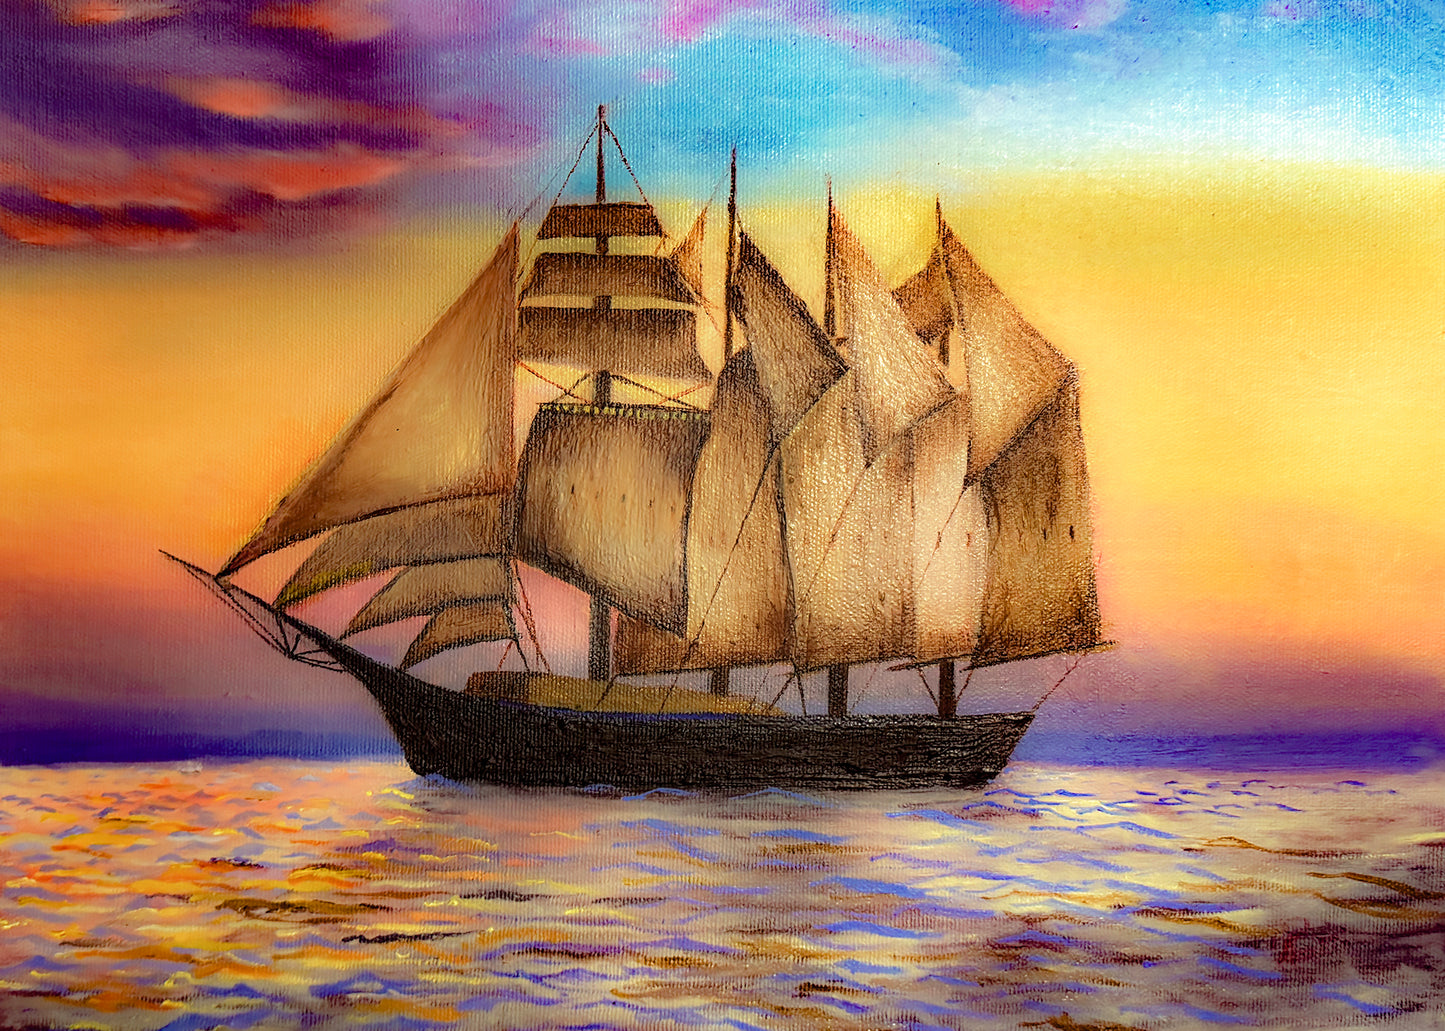 Four-Masted Barquentine, 11 x 14 in., Oil, Canvas, 2013